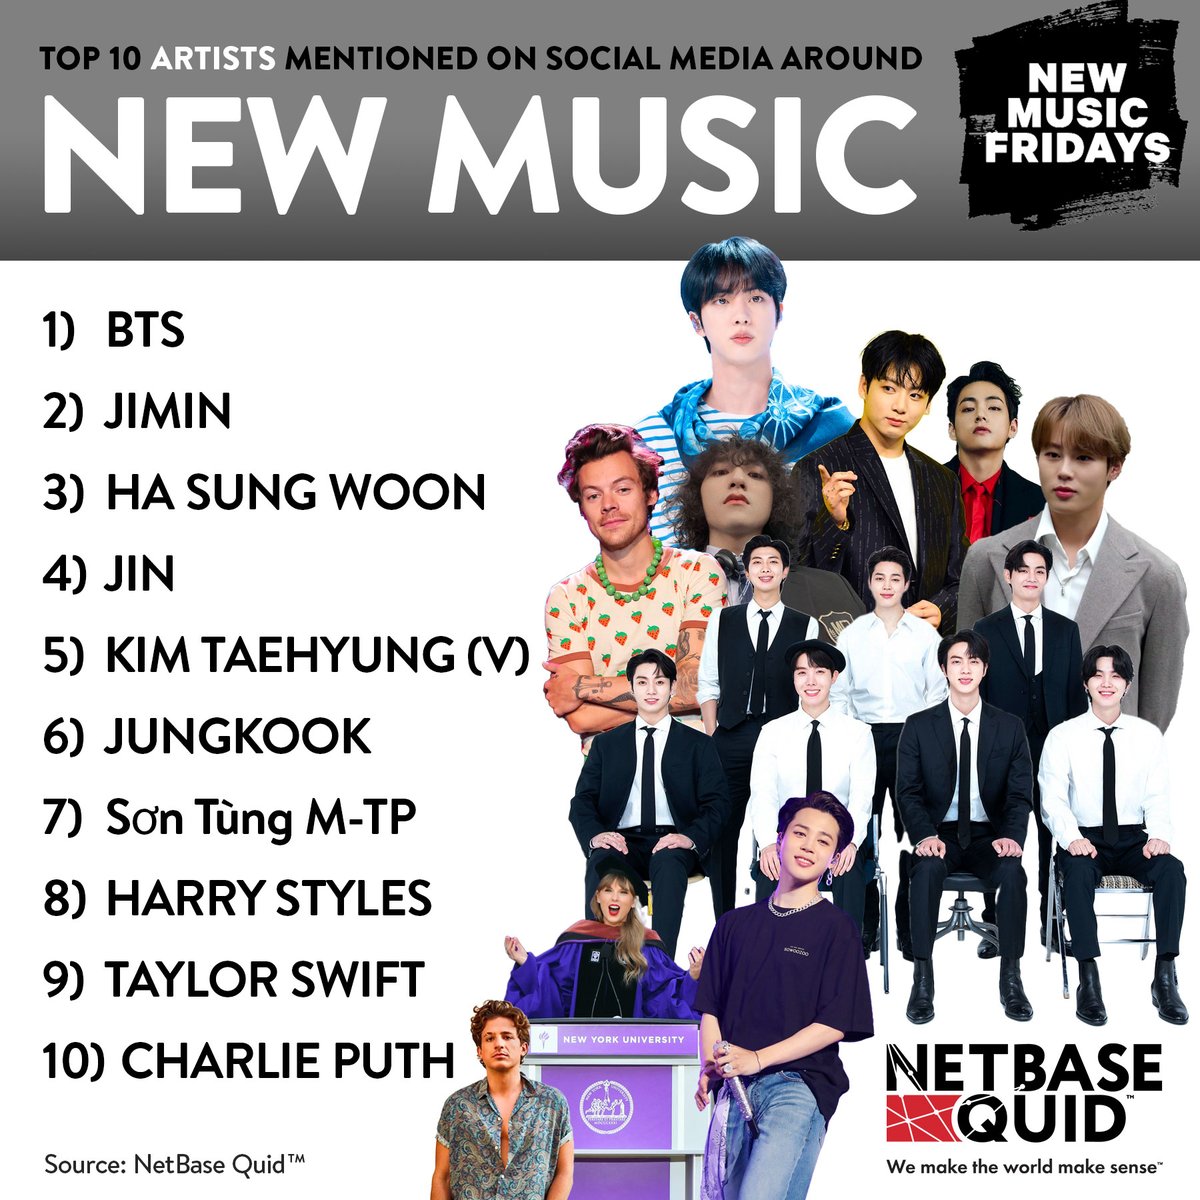 Using our consumer & market intelligence platform, these are the top 10 musicians being mentioned on Social Media in June!

1) #BTS 
2) #JIMIN
3) #SUNGWOON
4) #JIN
5) #KIMTAEHYUNG (V)
6) #JUNGKOOK
7) #SonTungMTP
8) #HarryStyles  
9) #TaylorSwift  
10) #CharliePuth